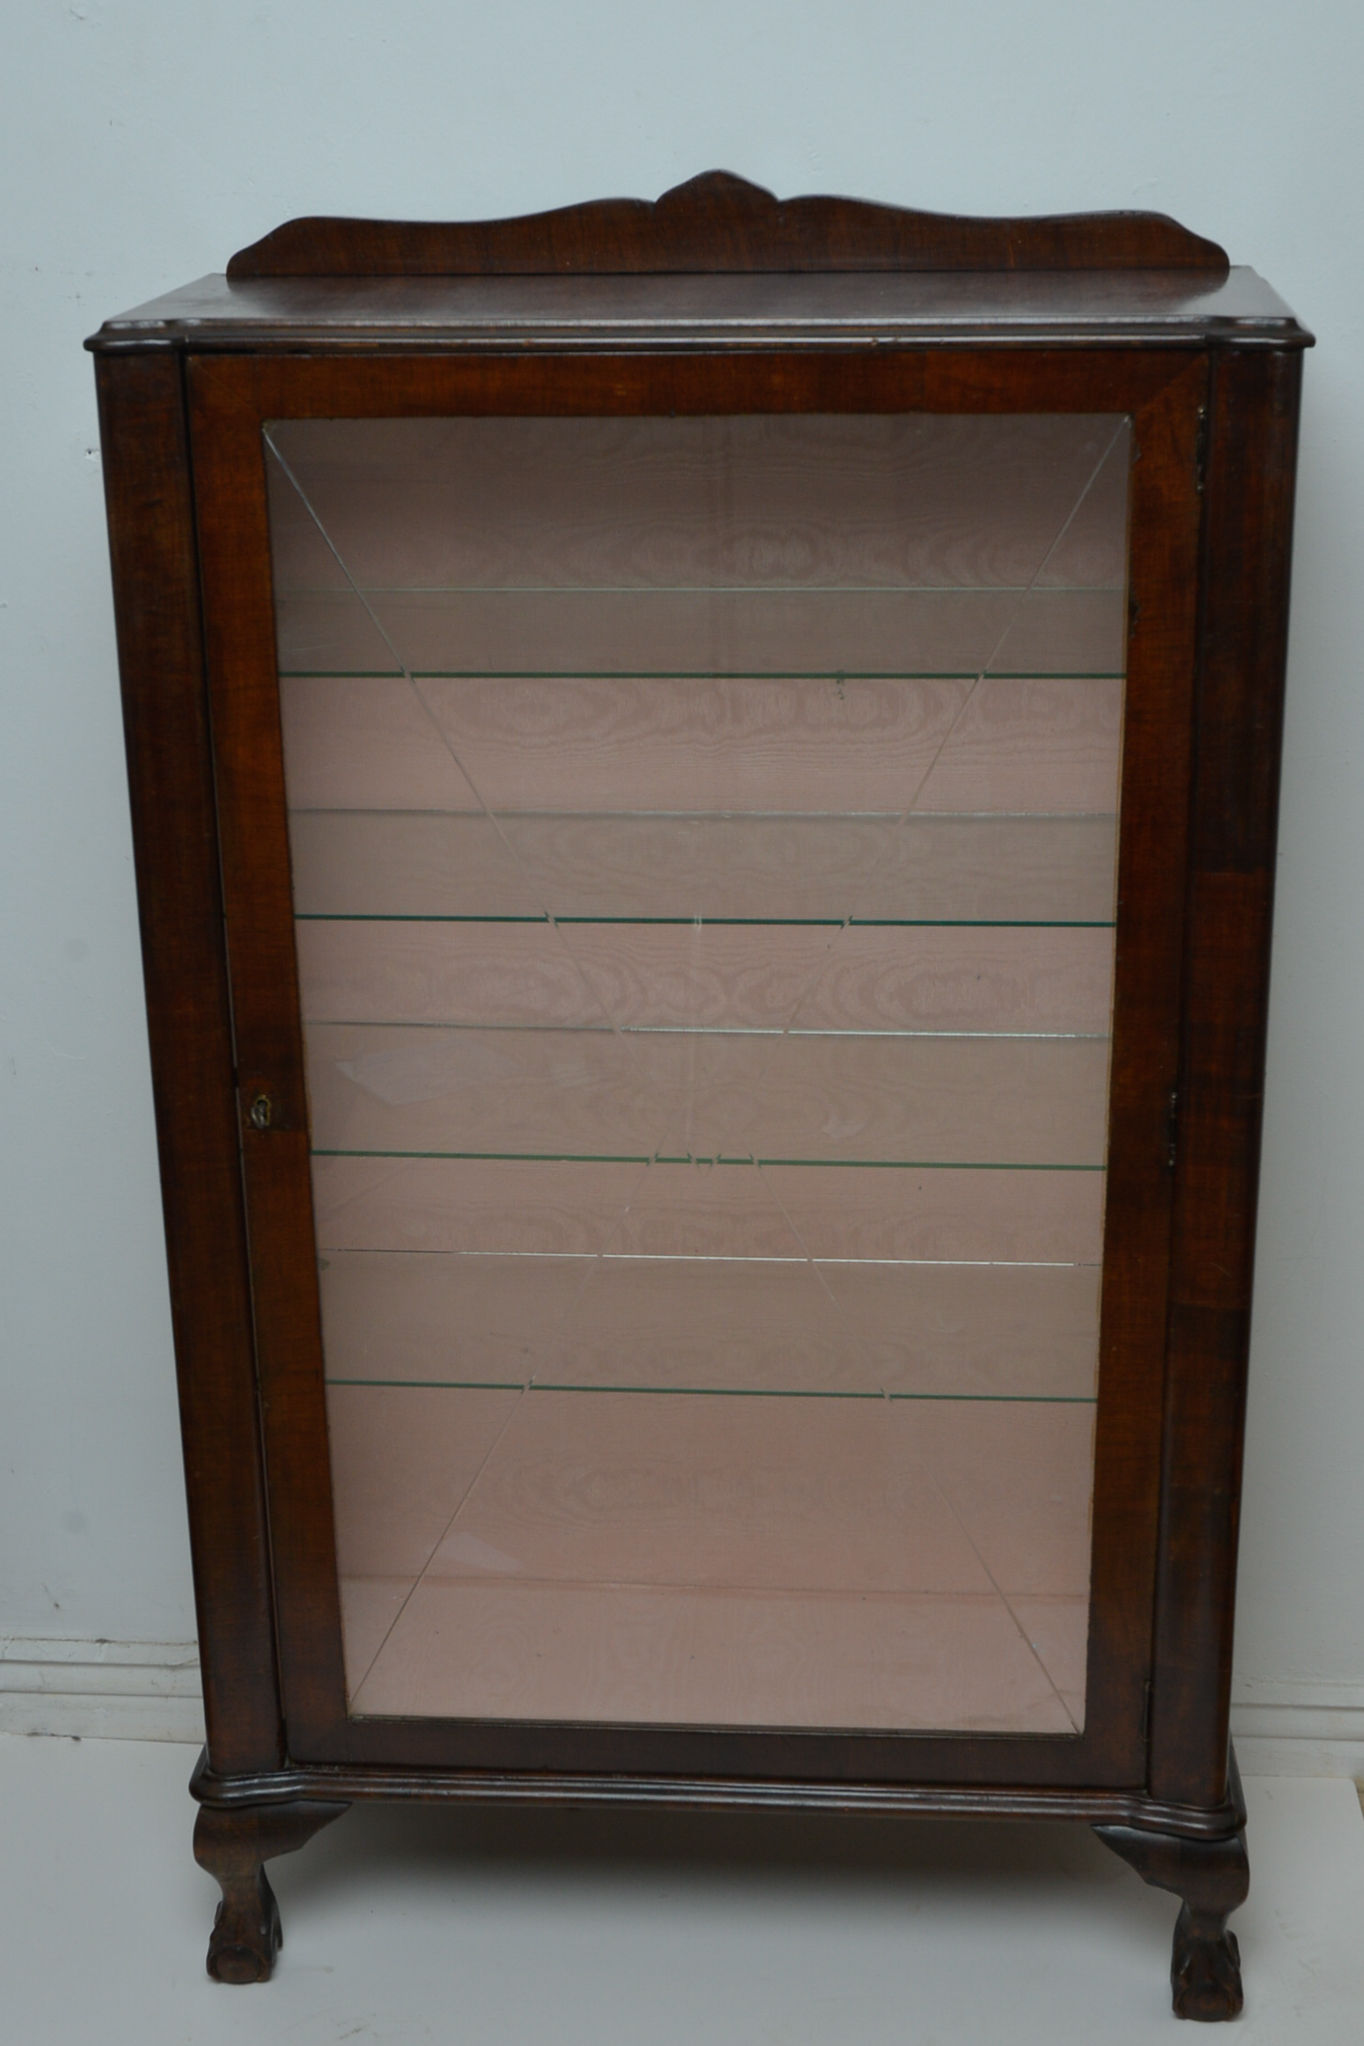 Art Deco Bevel Etched Glass Fronted Walnut Display Cabinet. - Image 4 of 4